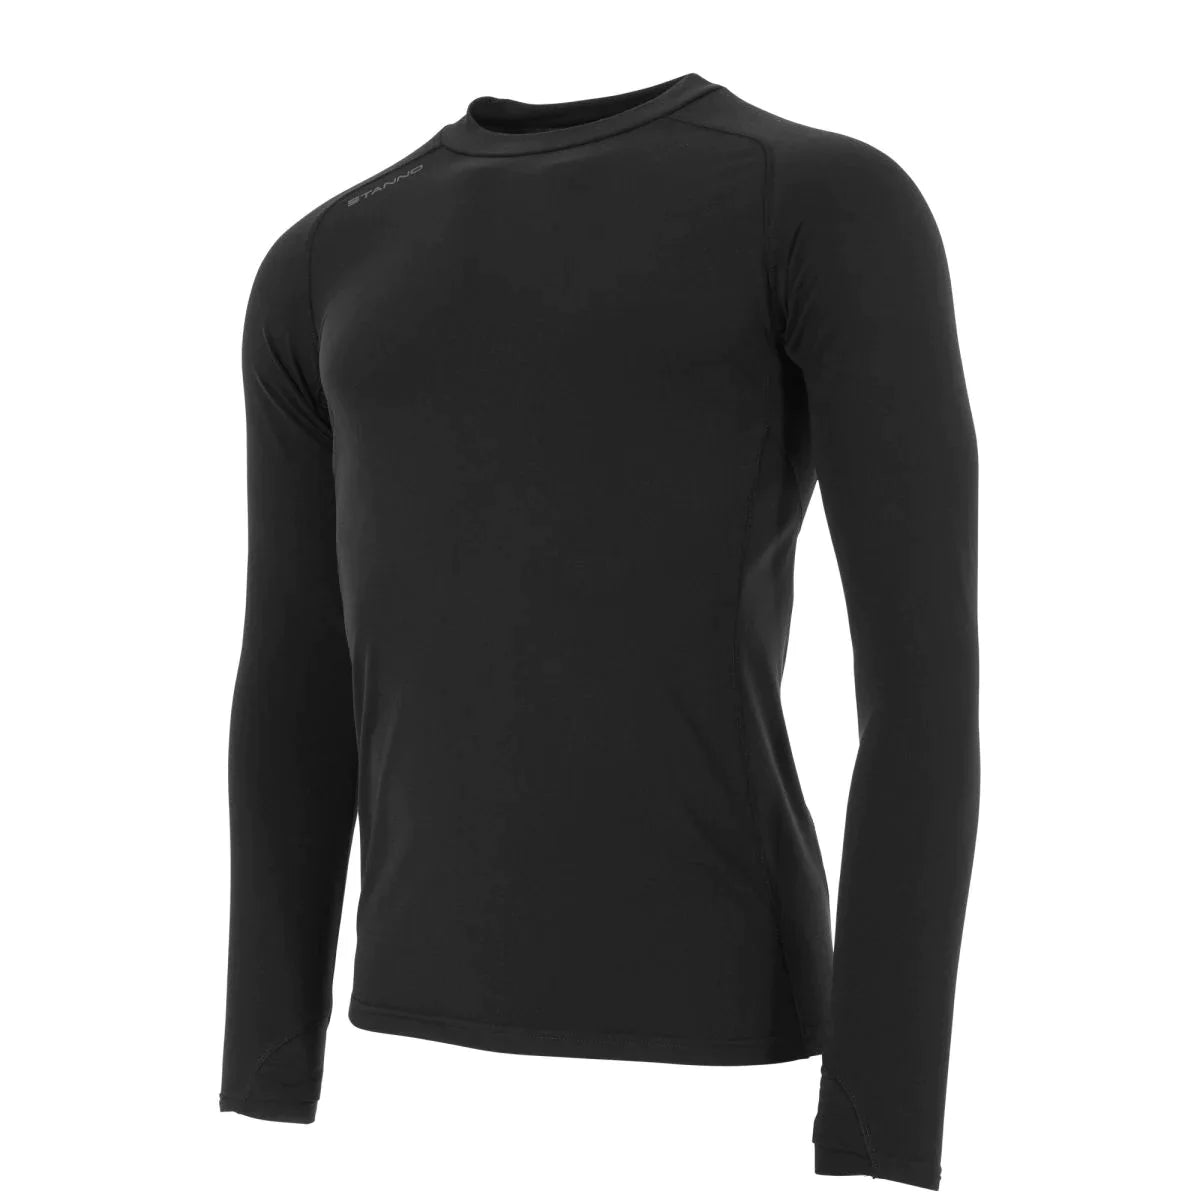 CORE THERMO LONG SLEEVE SHIRT